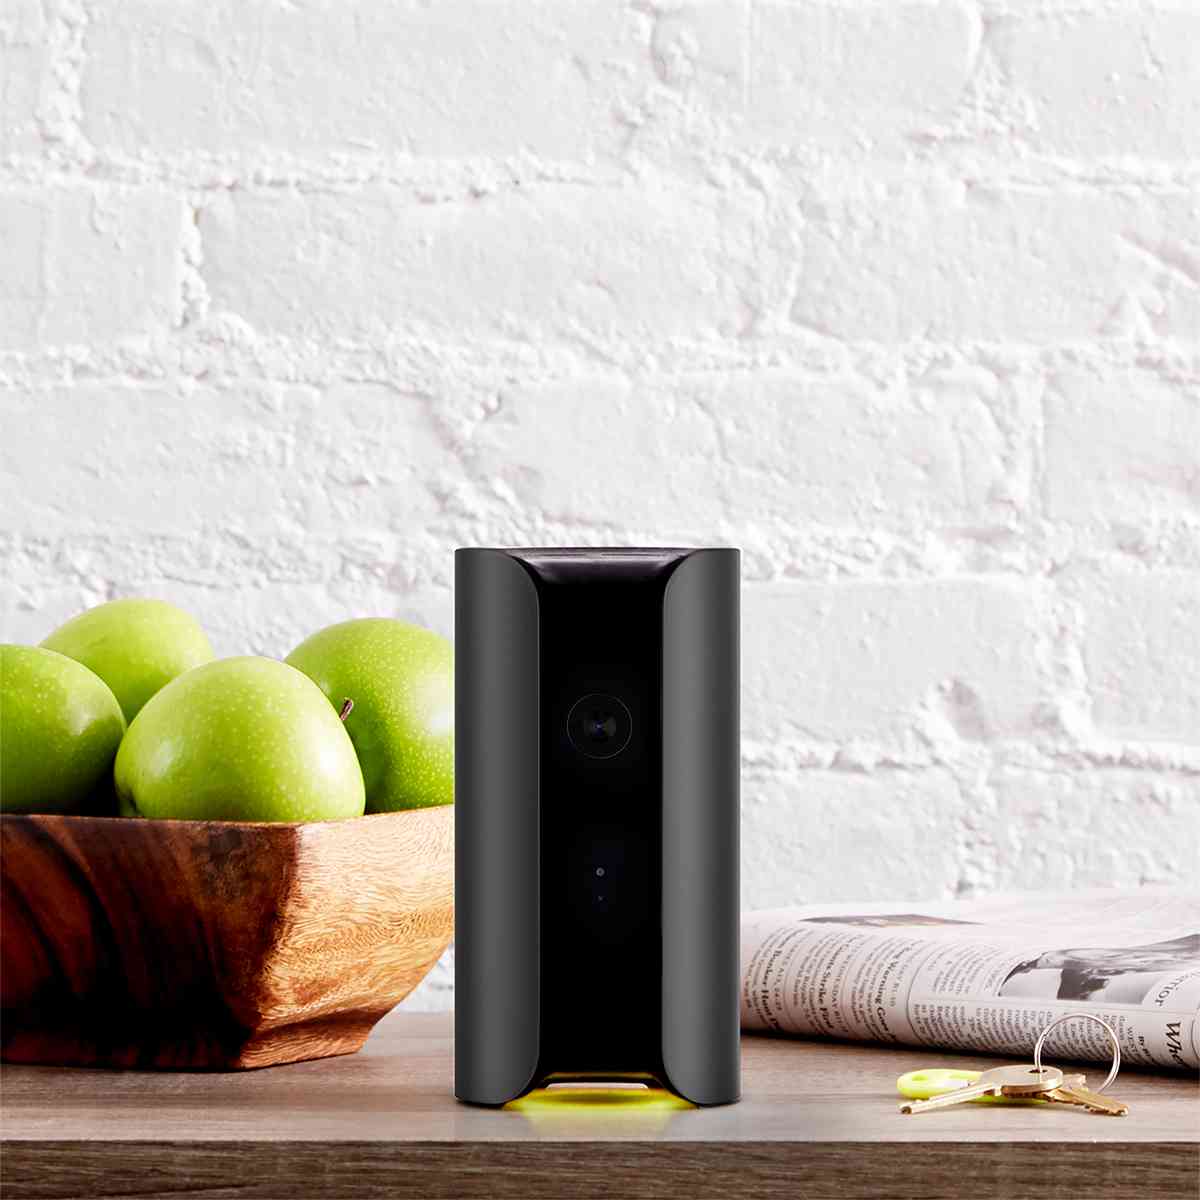 Canary All in one home security best buy